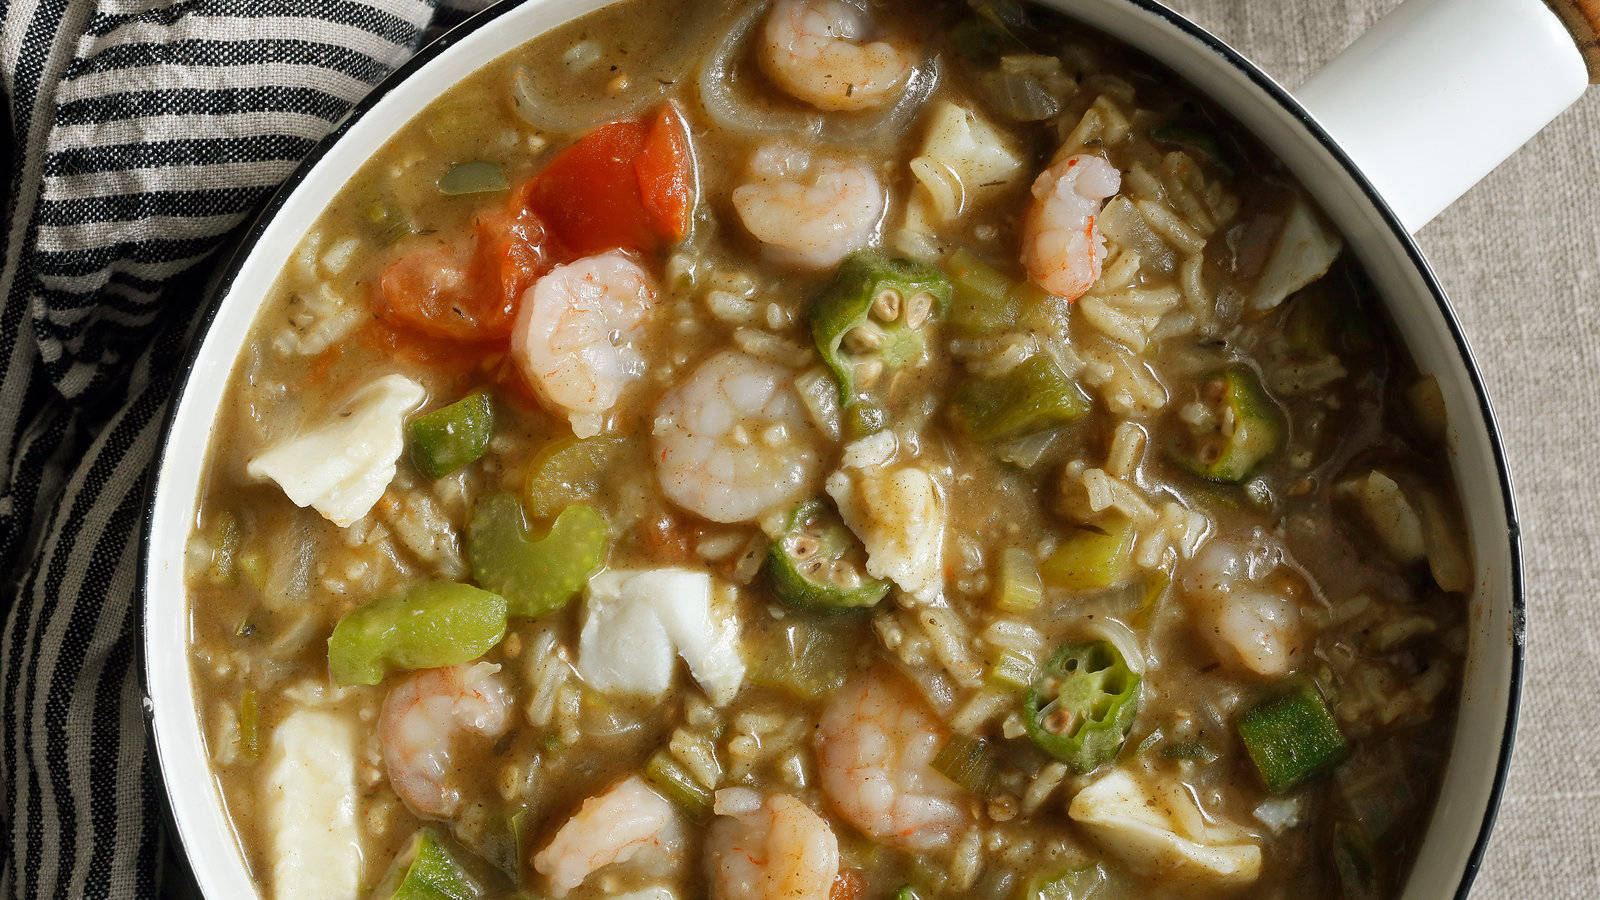 A delectable bowl of Gumbo with Shrimp and Vegetables Wallpaper